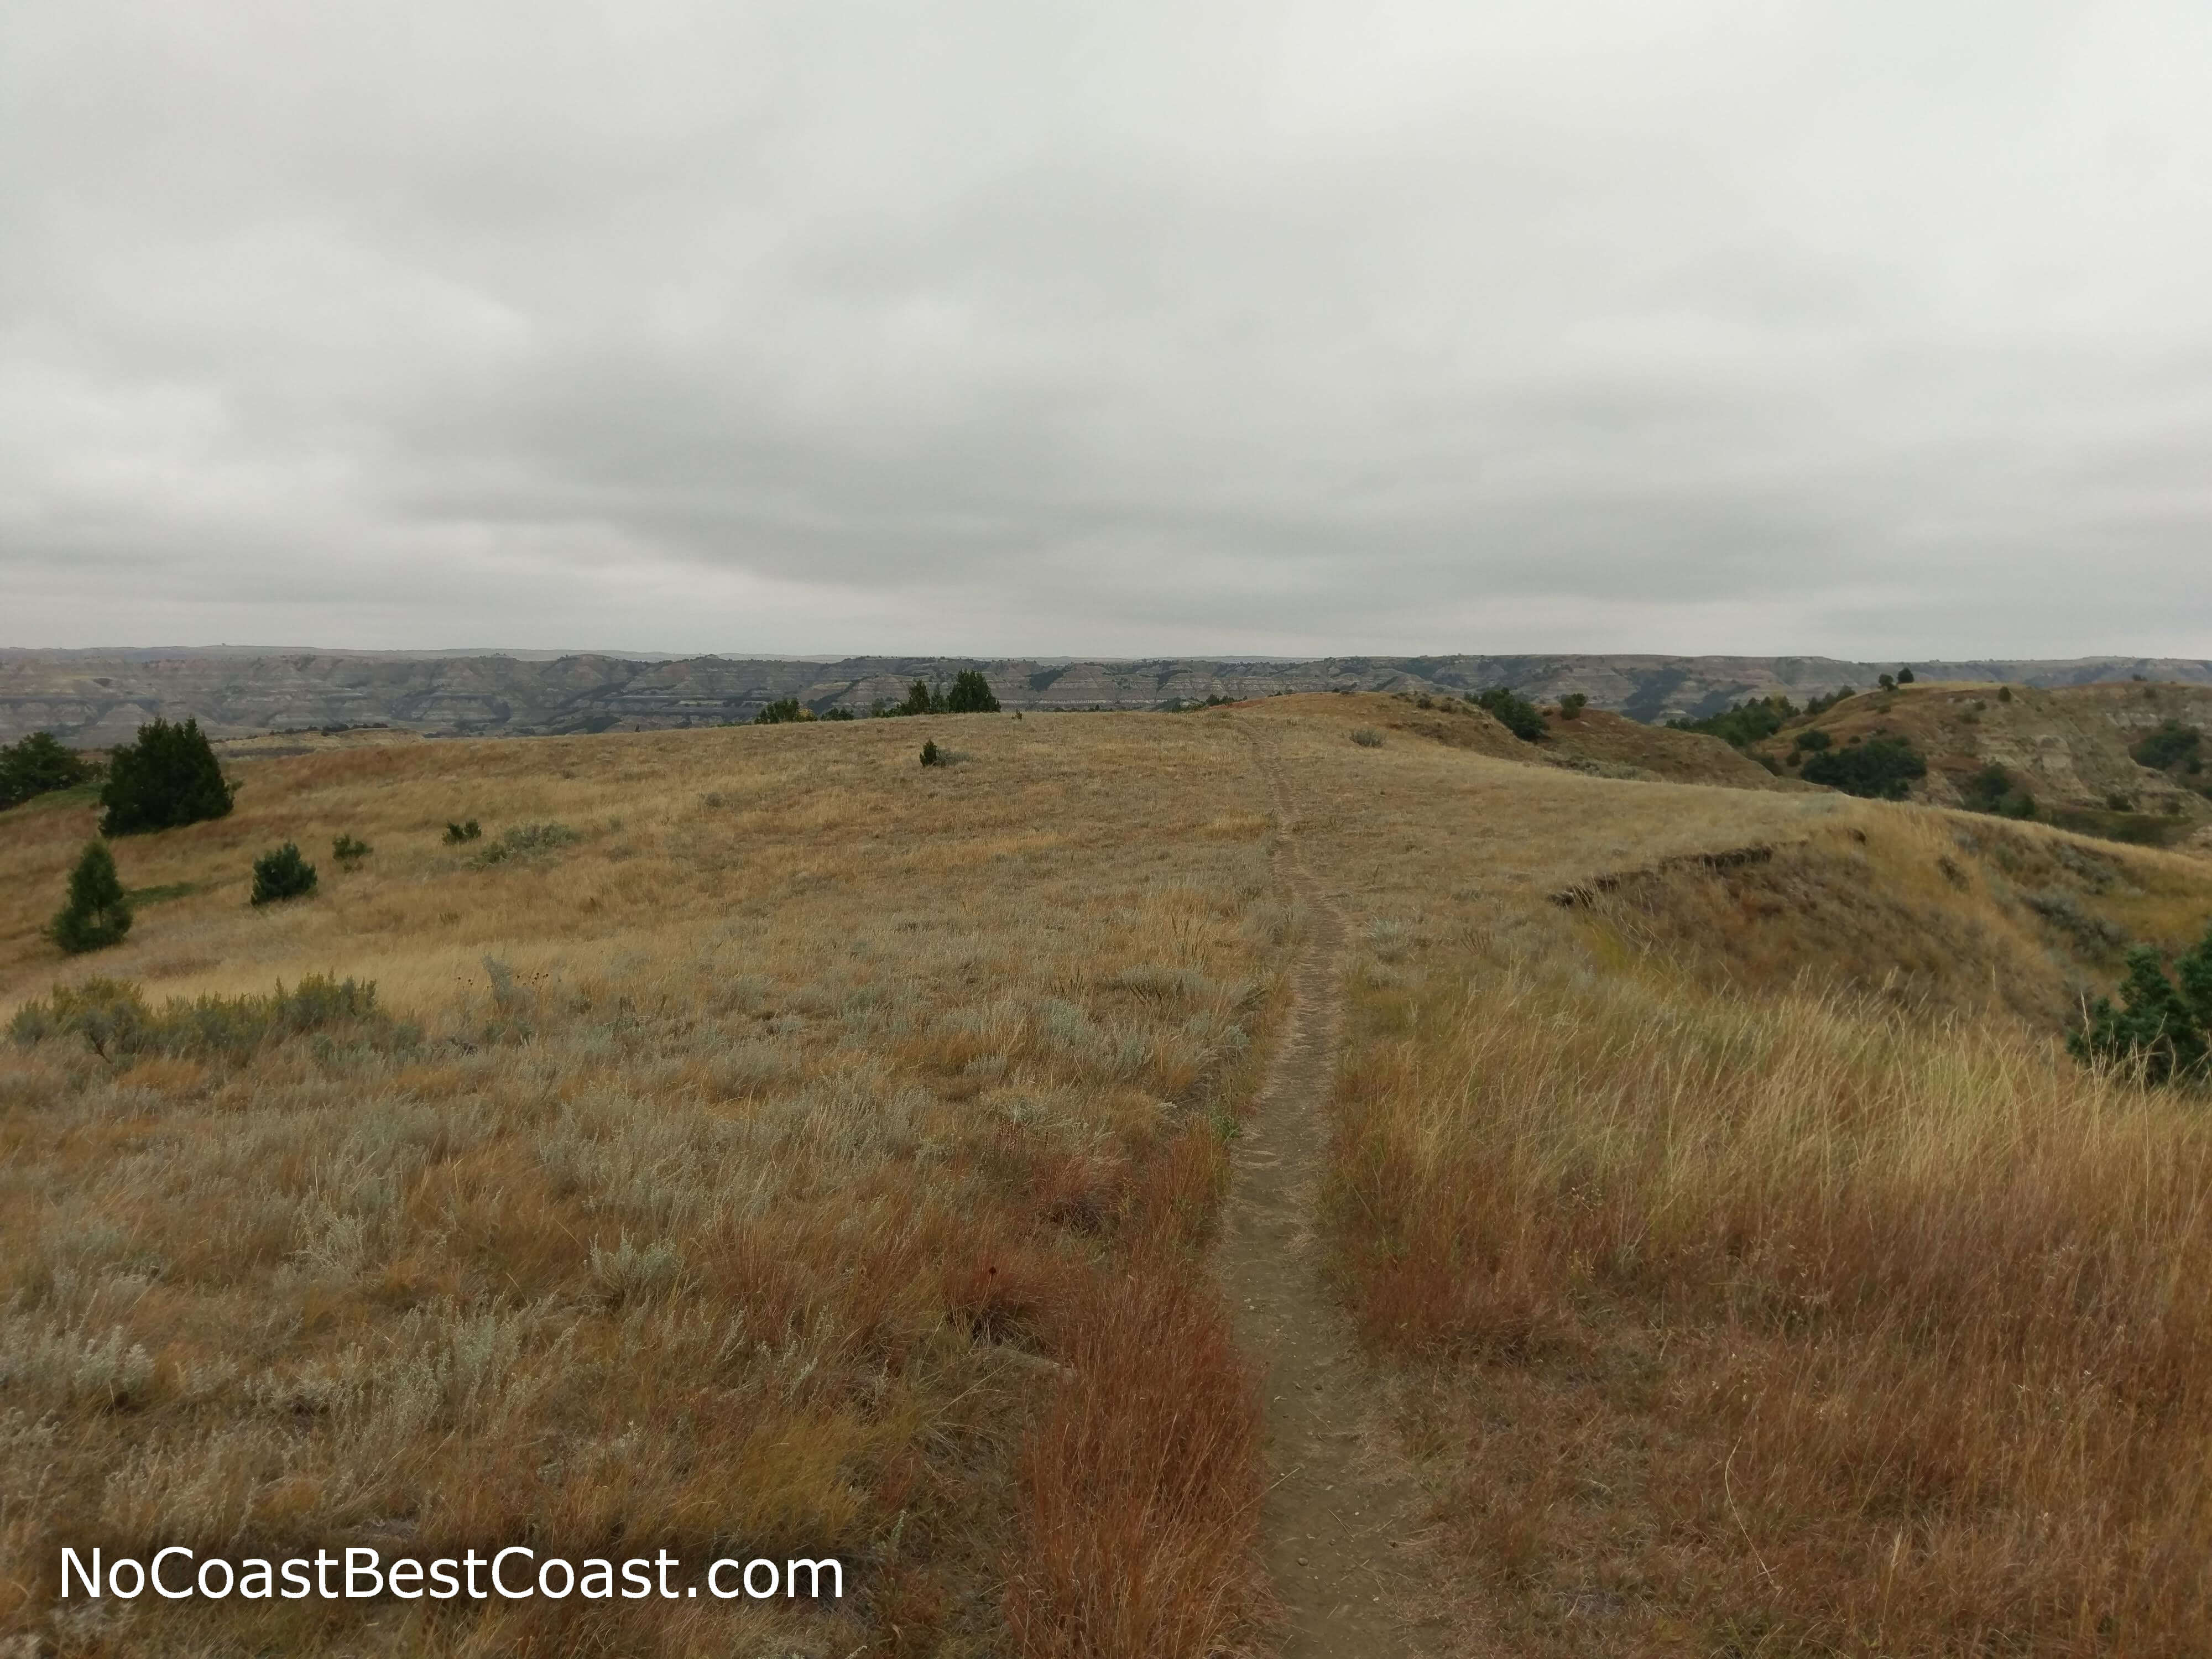 Caprock Coulee Trail as it extends across the plateau